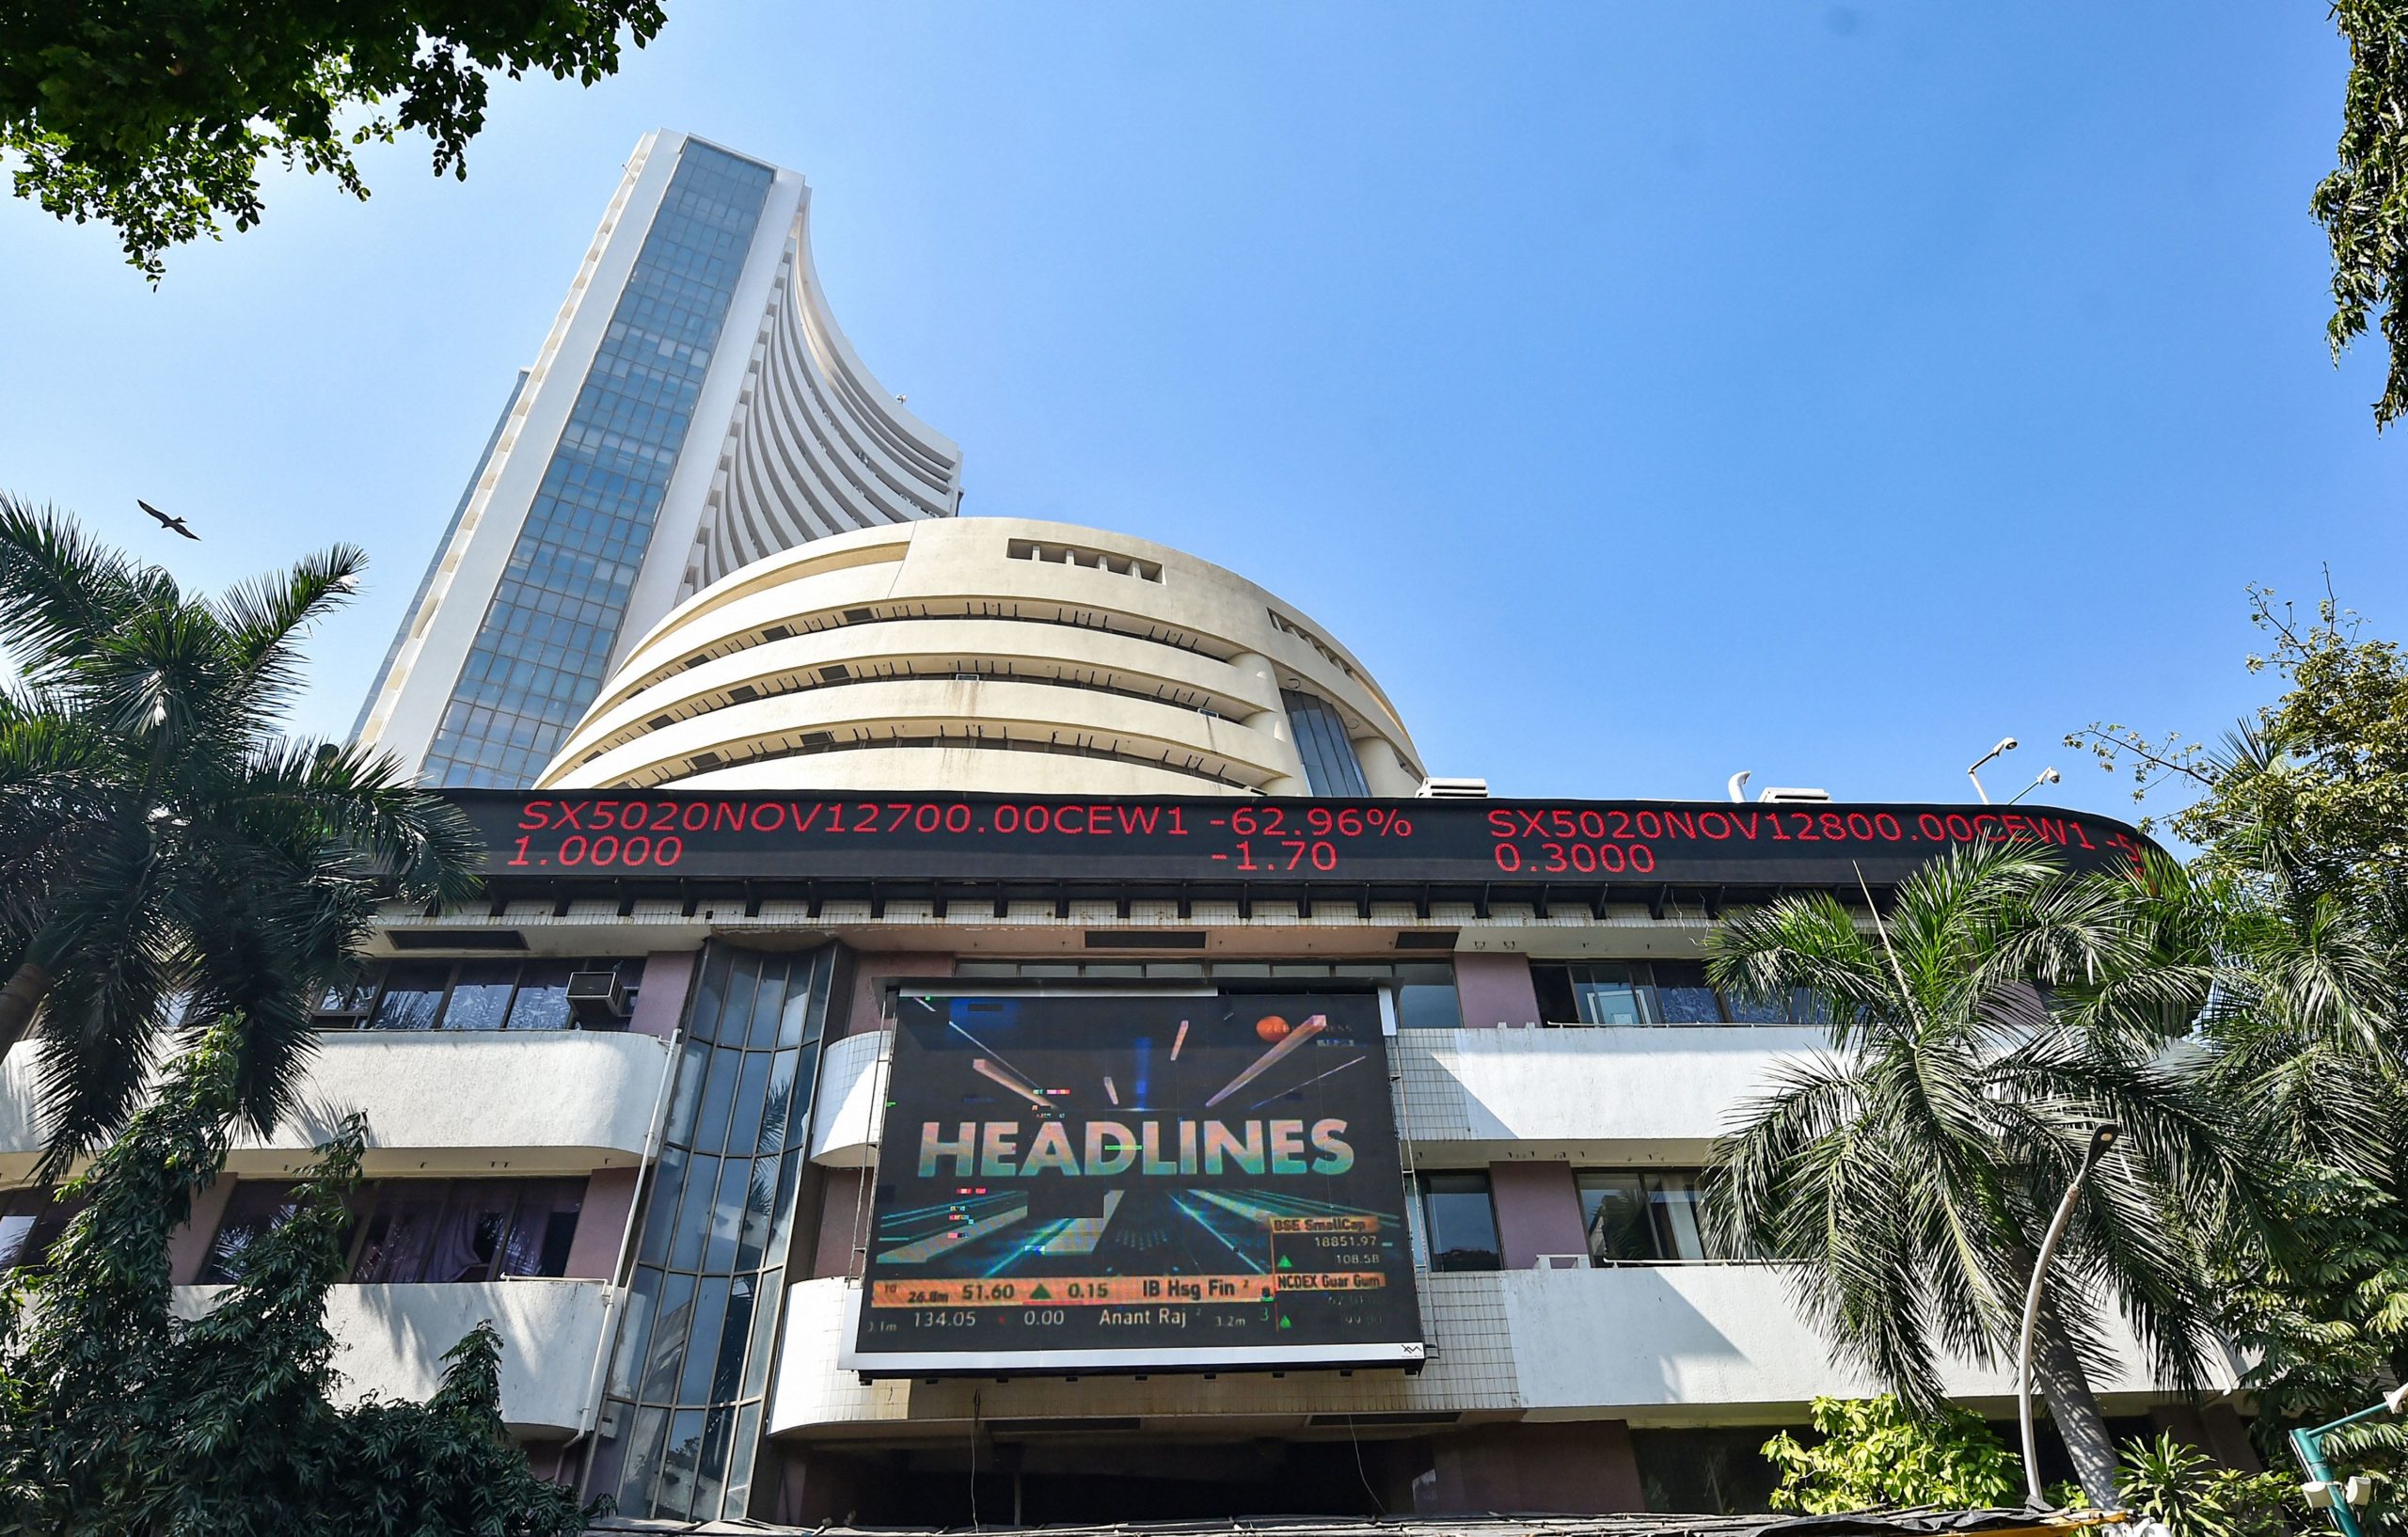 Trending Stocks: Reliance, Infosys, ICICI Bank and others in news today